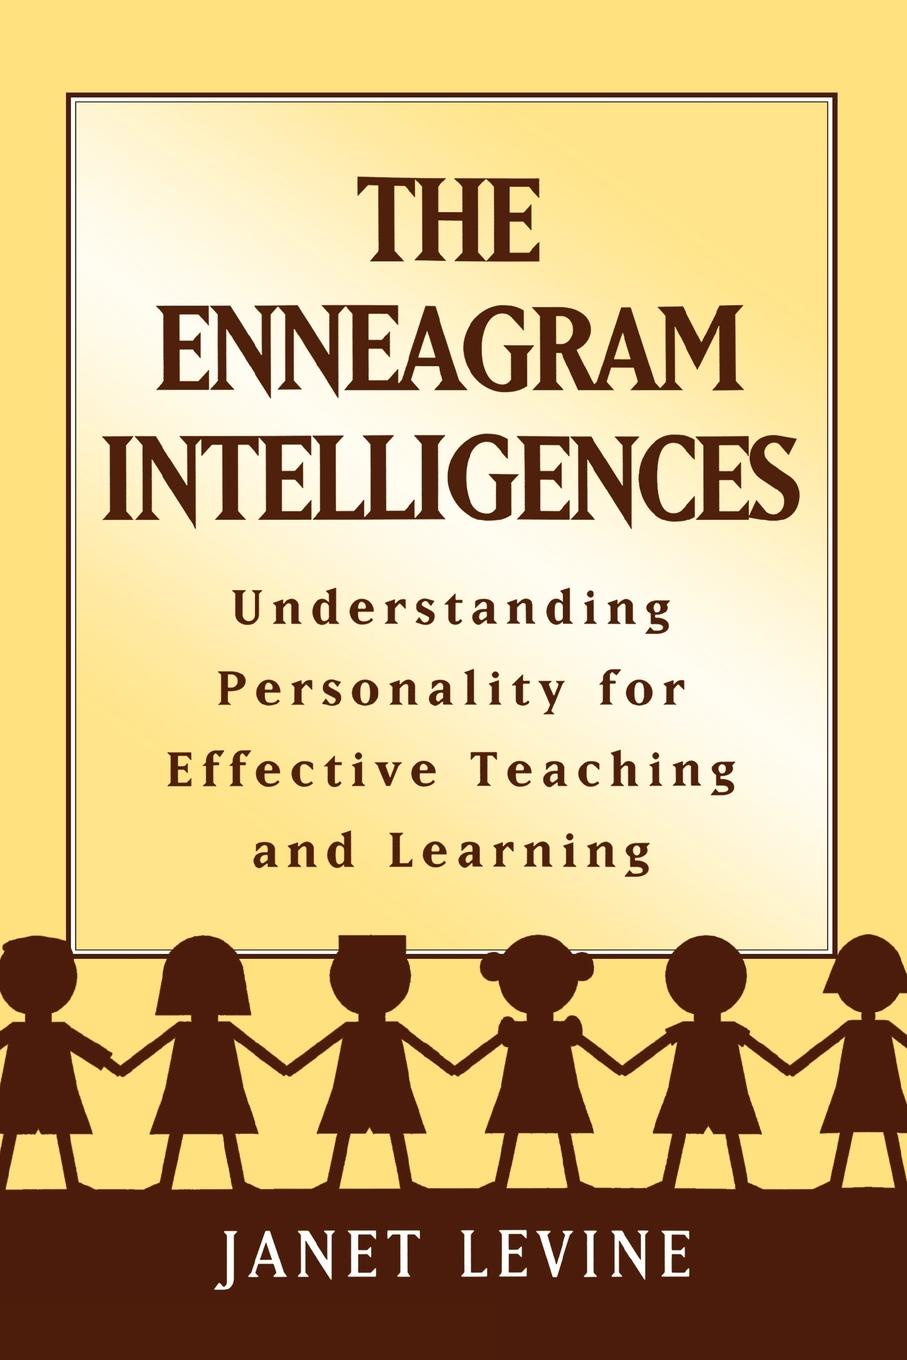 Enneagram Intelligences. Understanding Personality for Effective Teaching and Learning